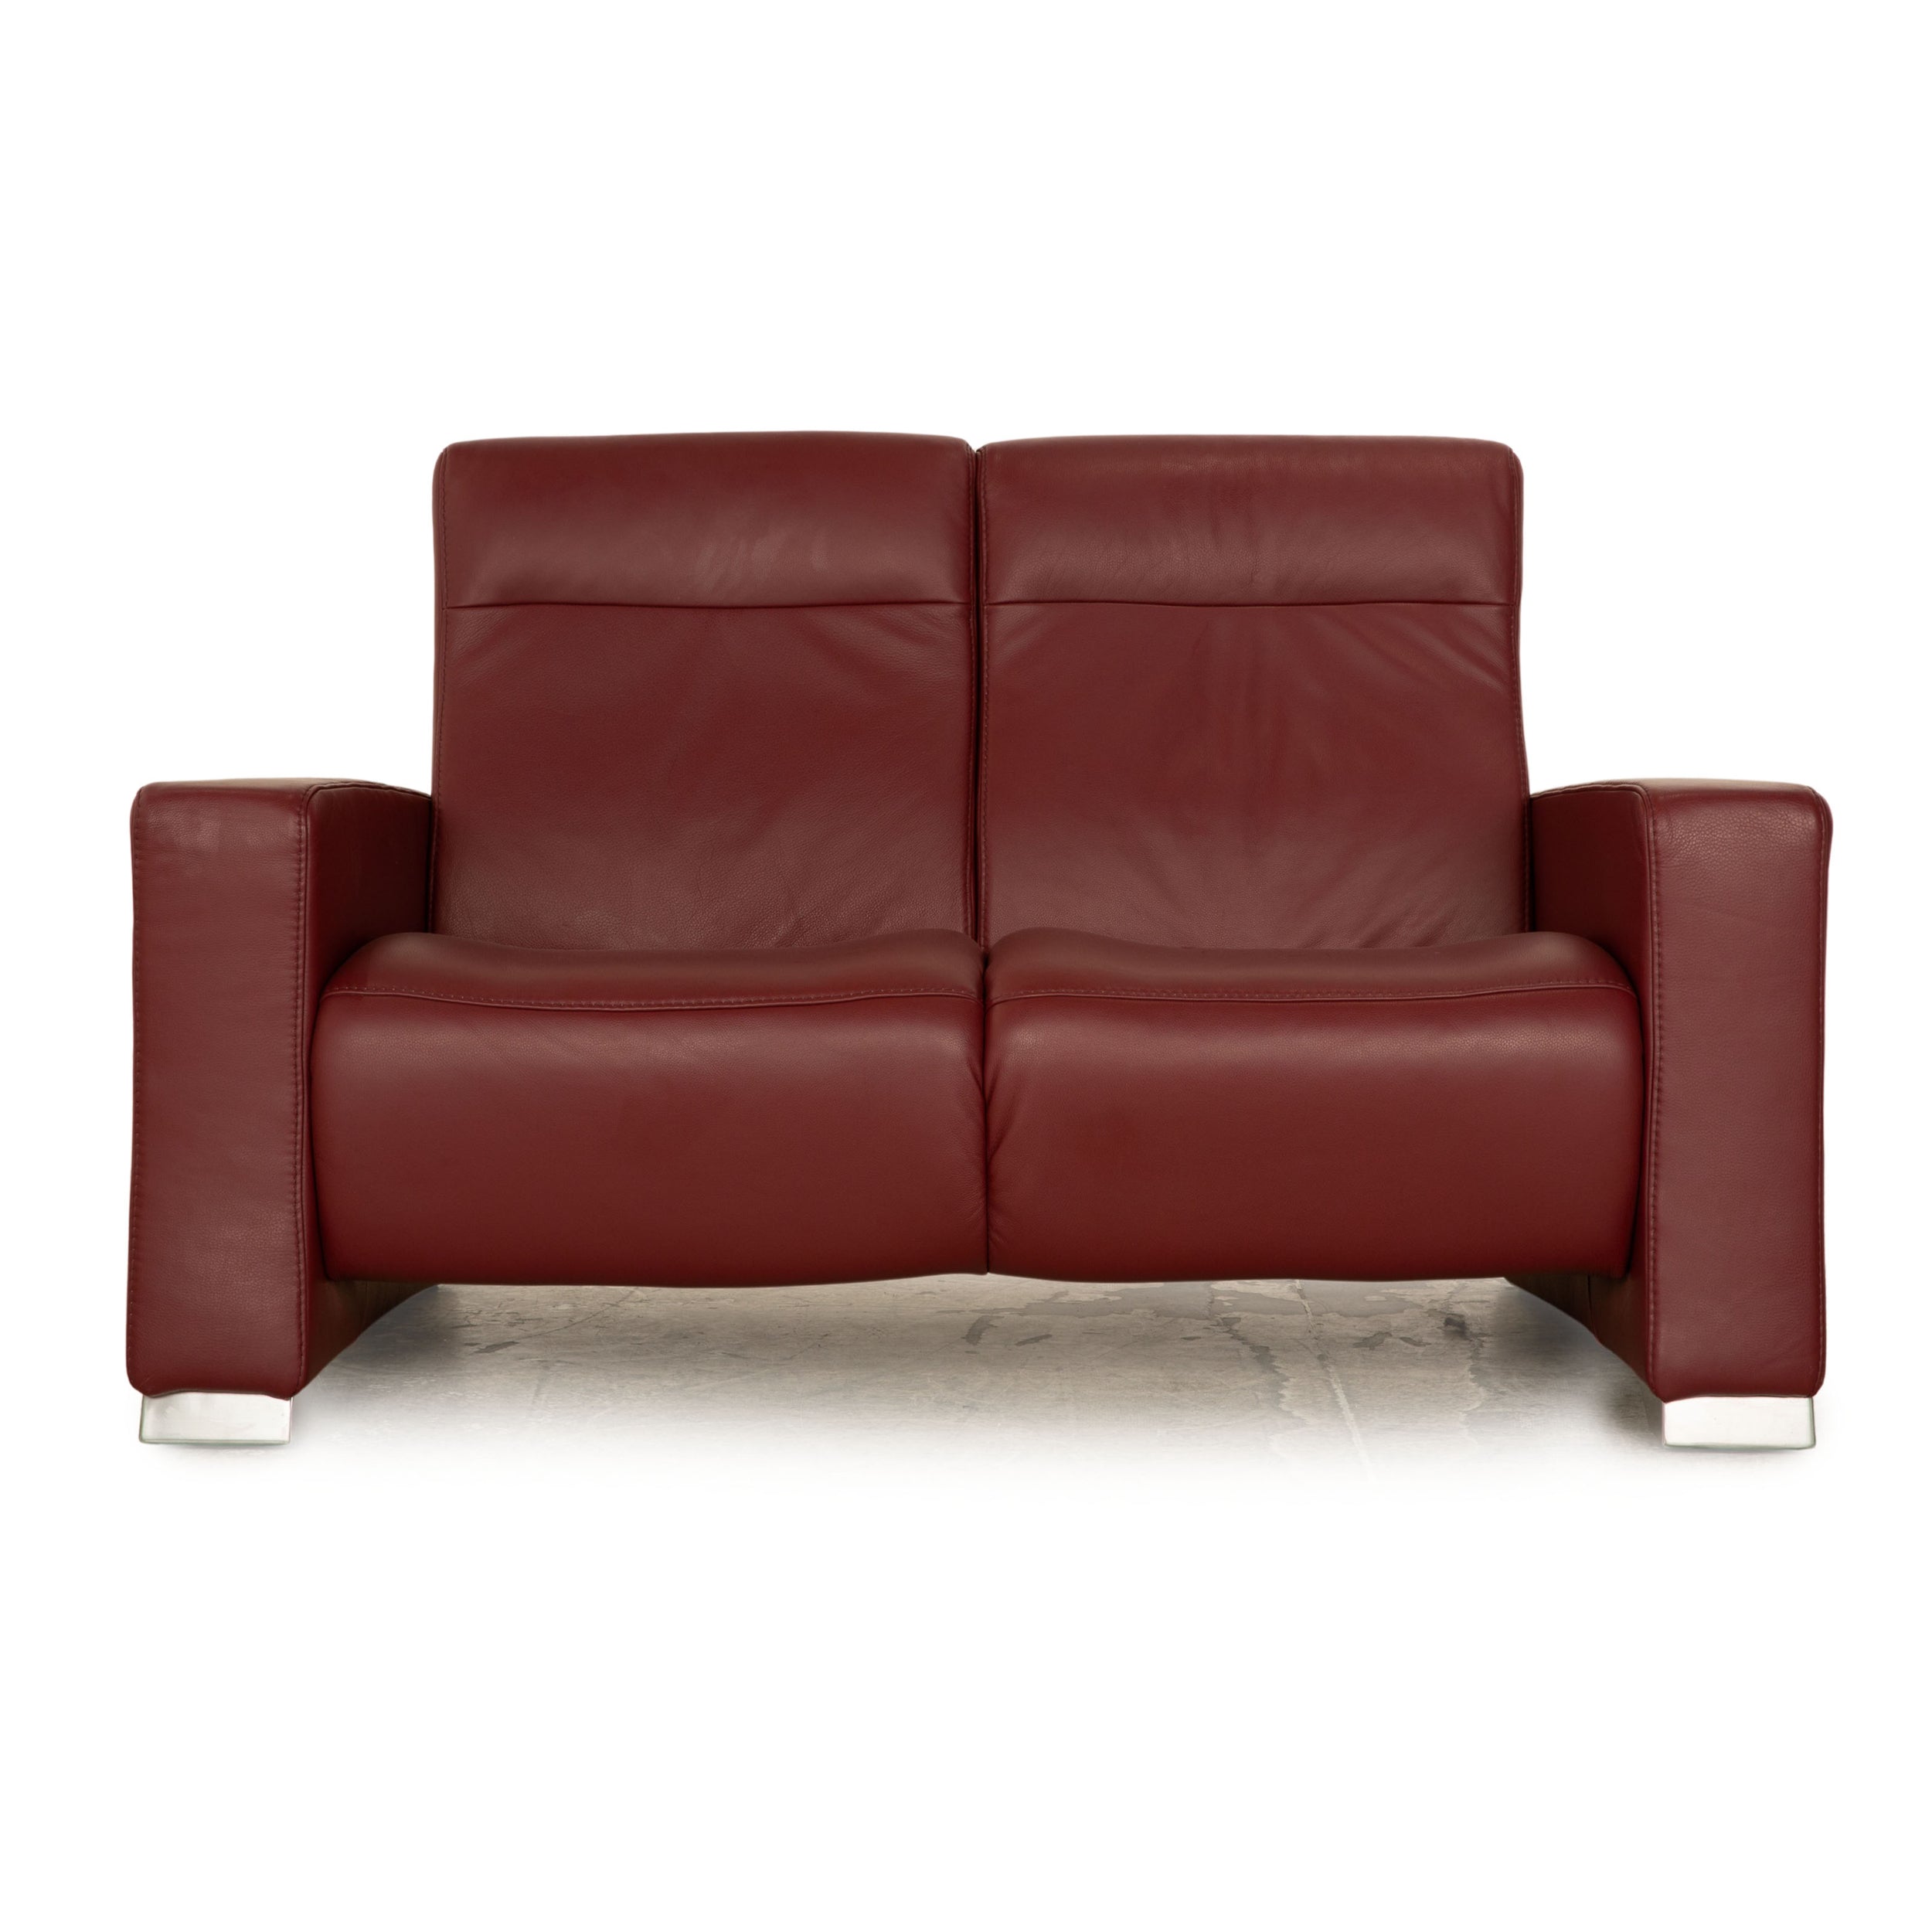 Himolla Cumuly Leder Zweisitzer Rot Weinrot Sofa Couch